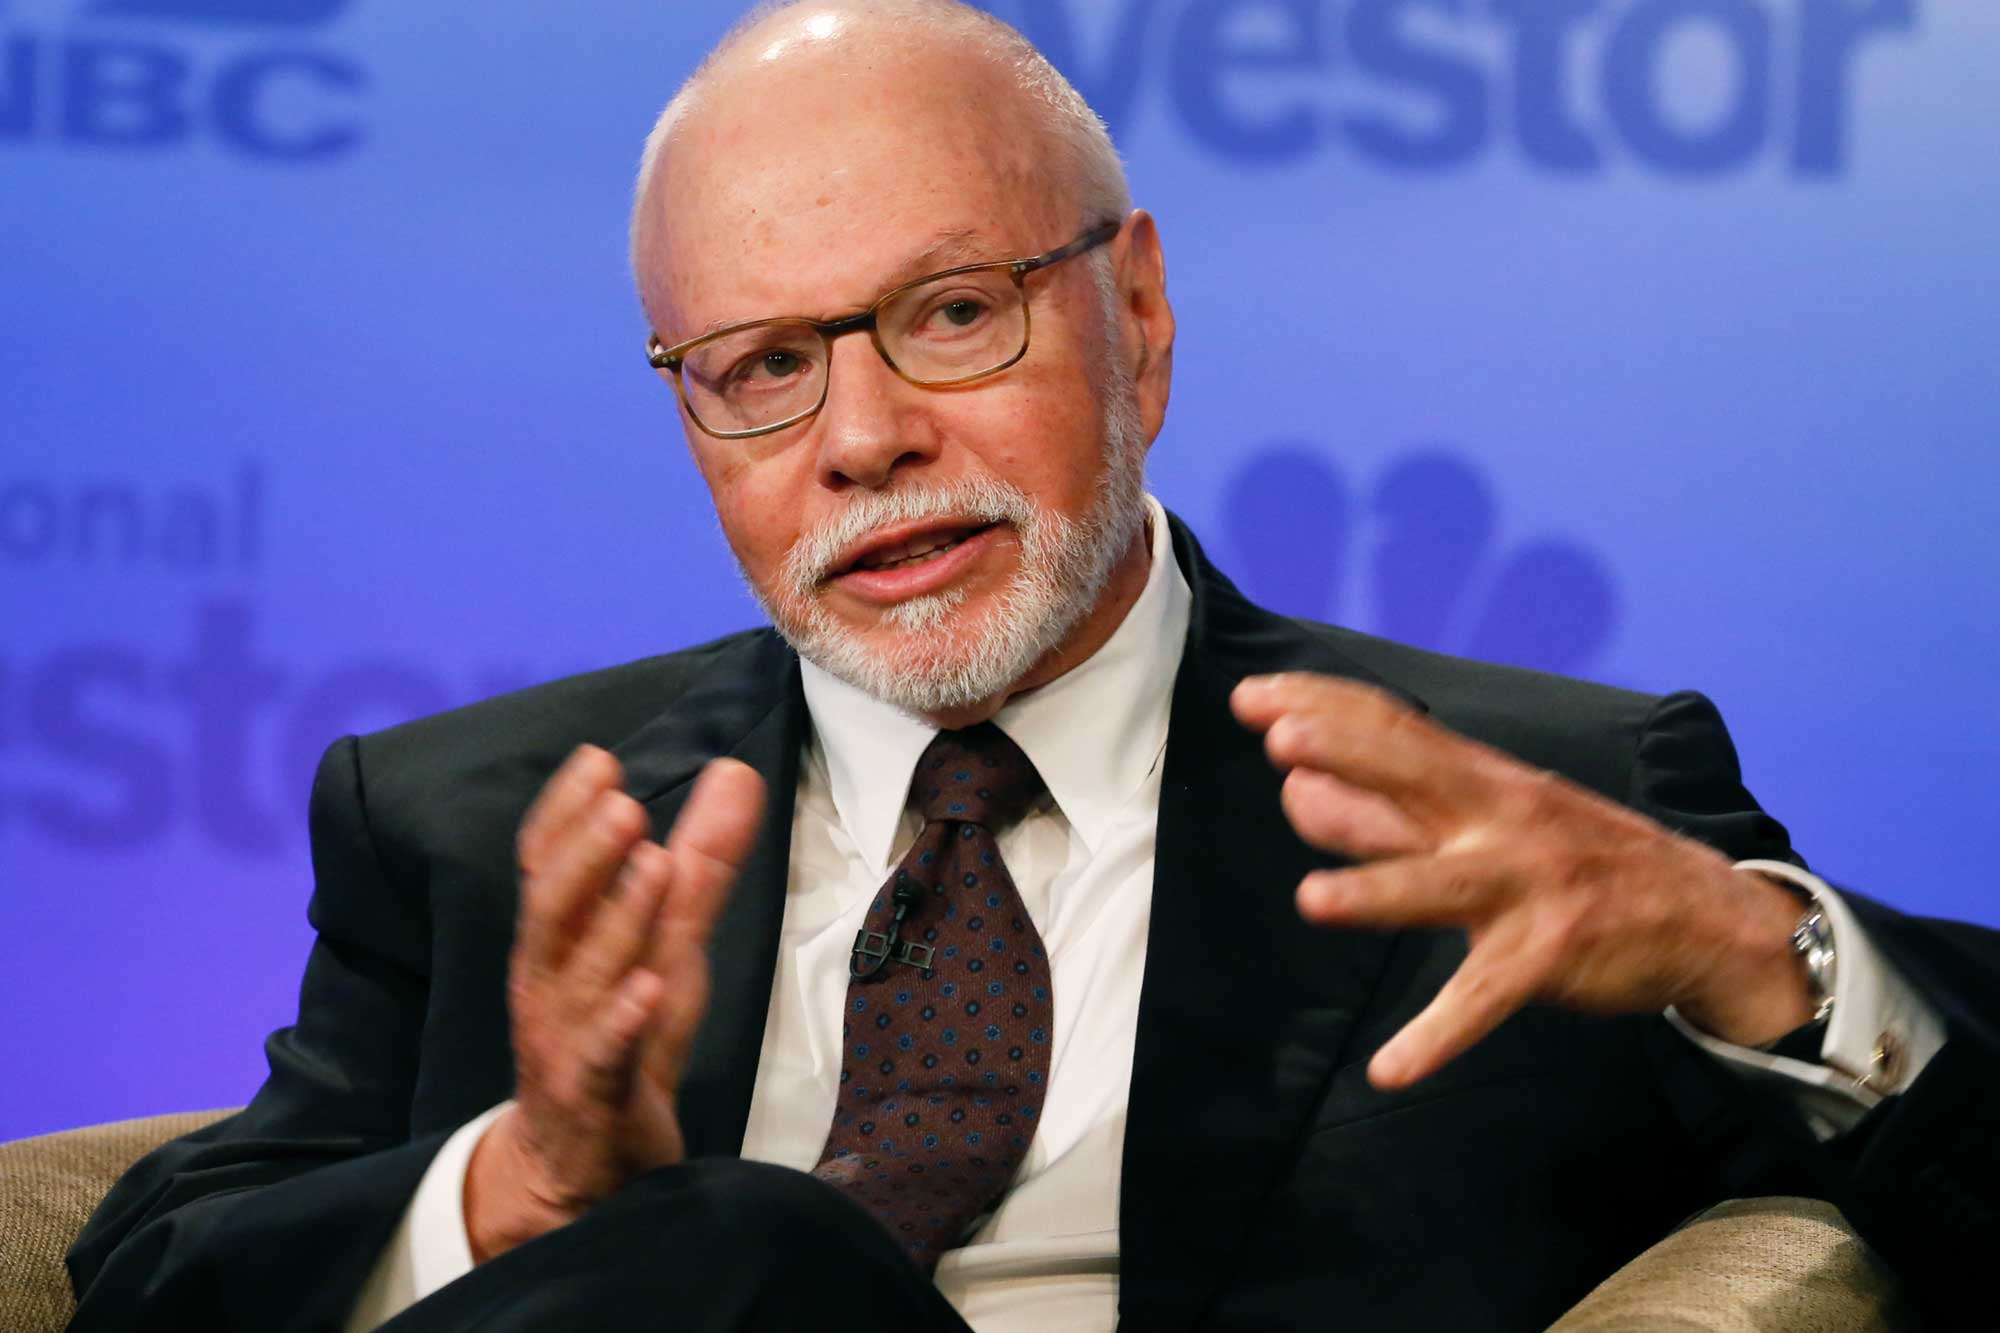 GOP donor Paul Singer’s agency has seat on Twitter board, however cannot discuss insurance policies